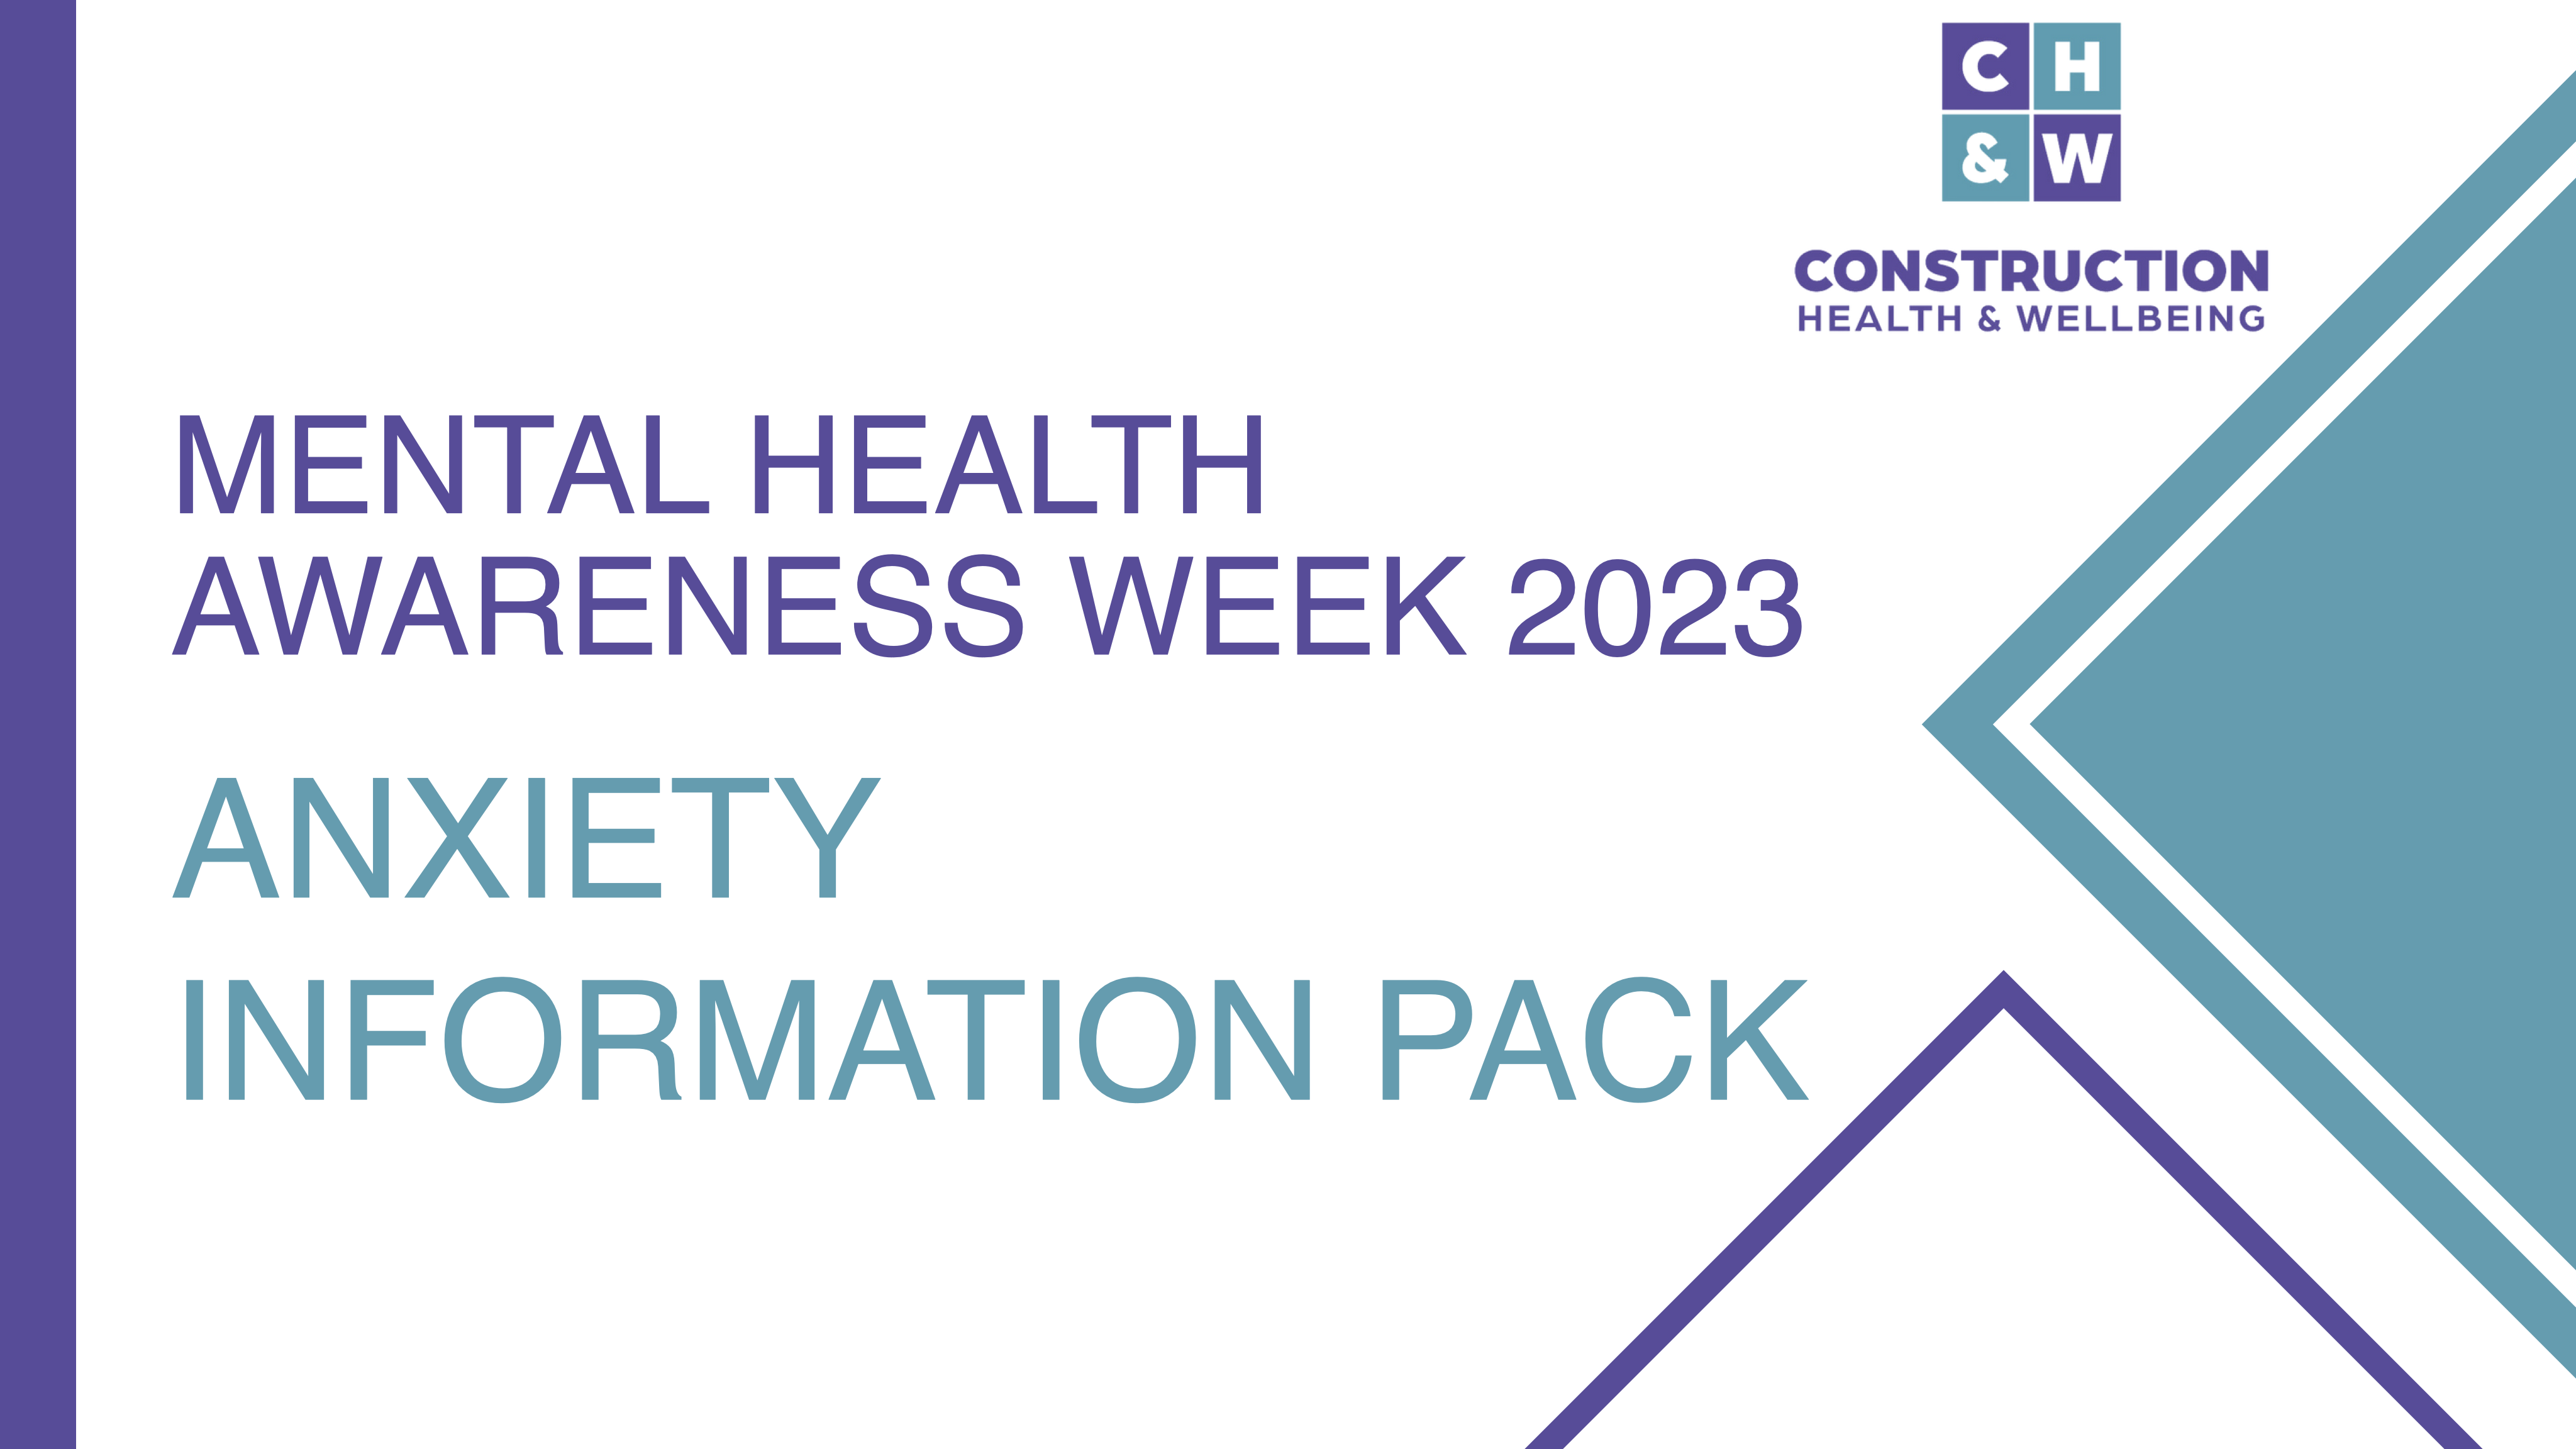 Why are more construction workers experiencing anxiety?   Mental Health Awareness Week 2023